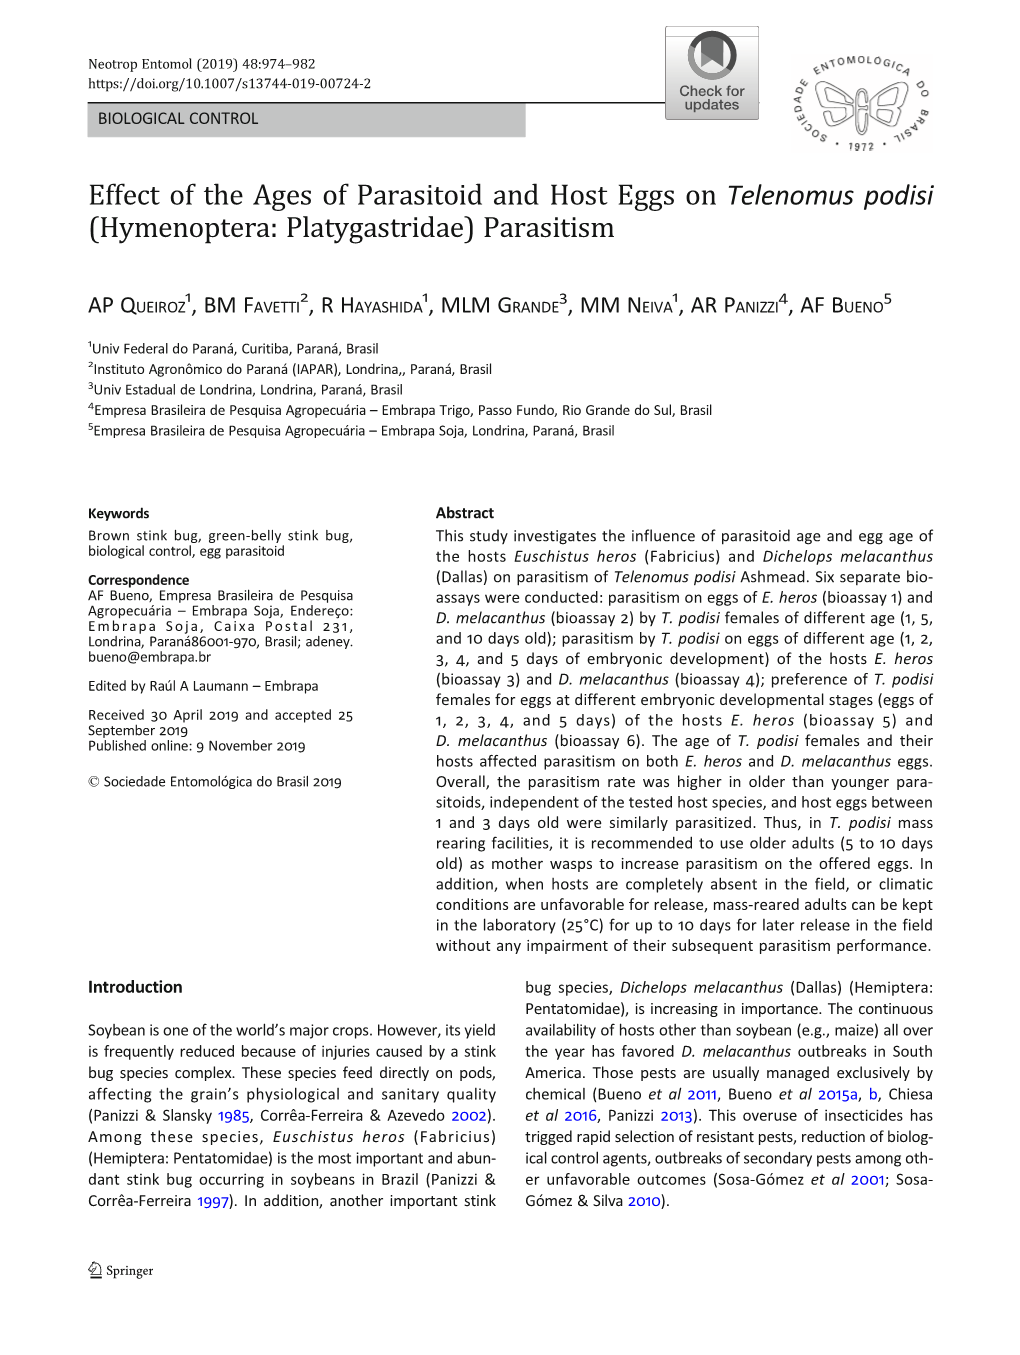 Effect of the Ages of Parasitoid and Host Eggs on Telenomus Podisi (Hymenoptera: Platygastridae) Parasitism